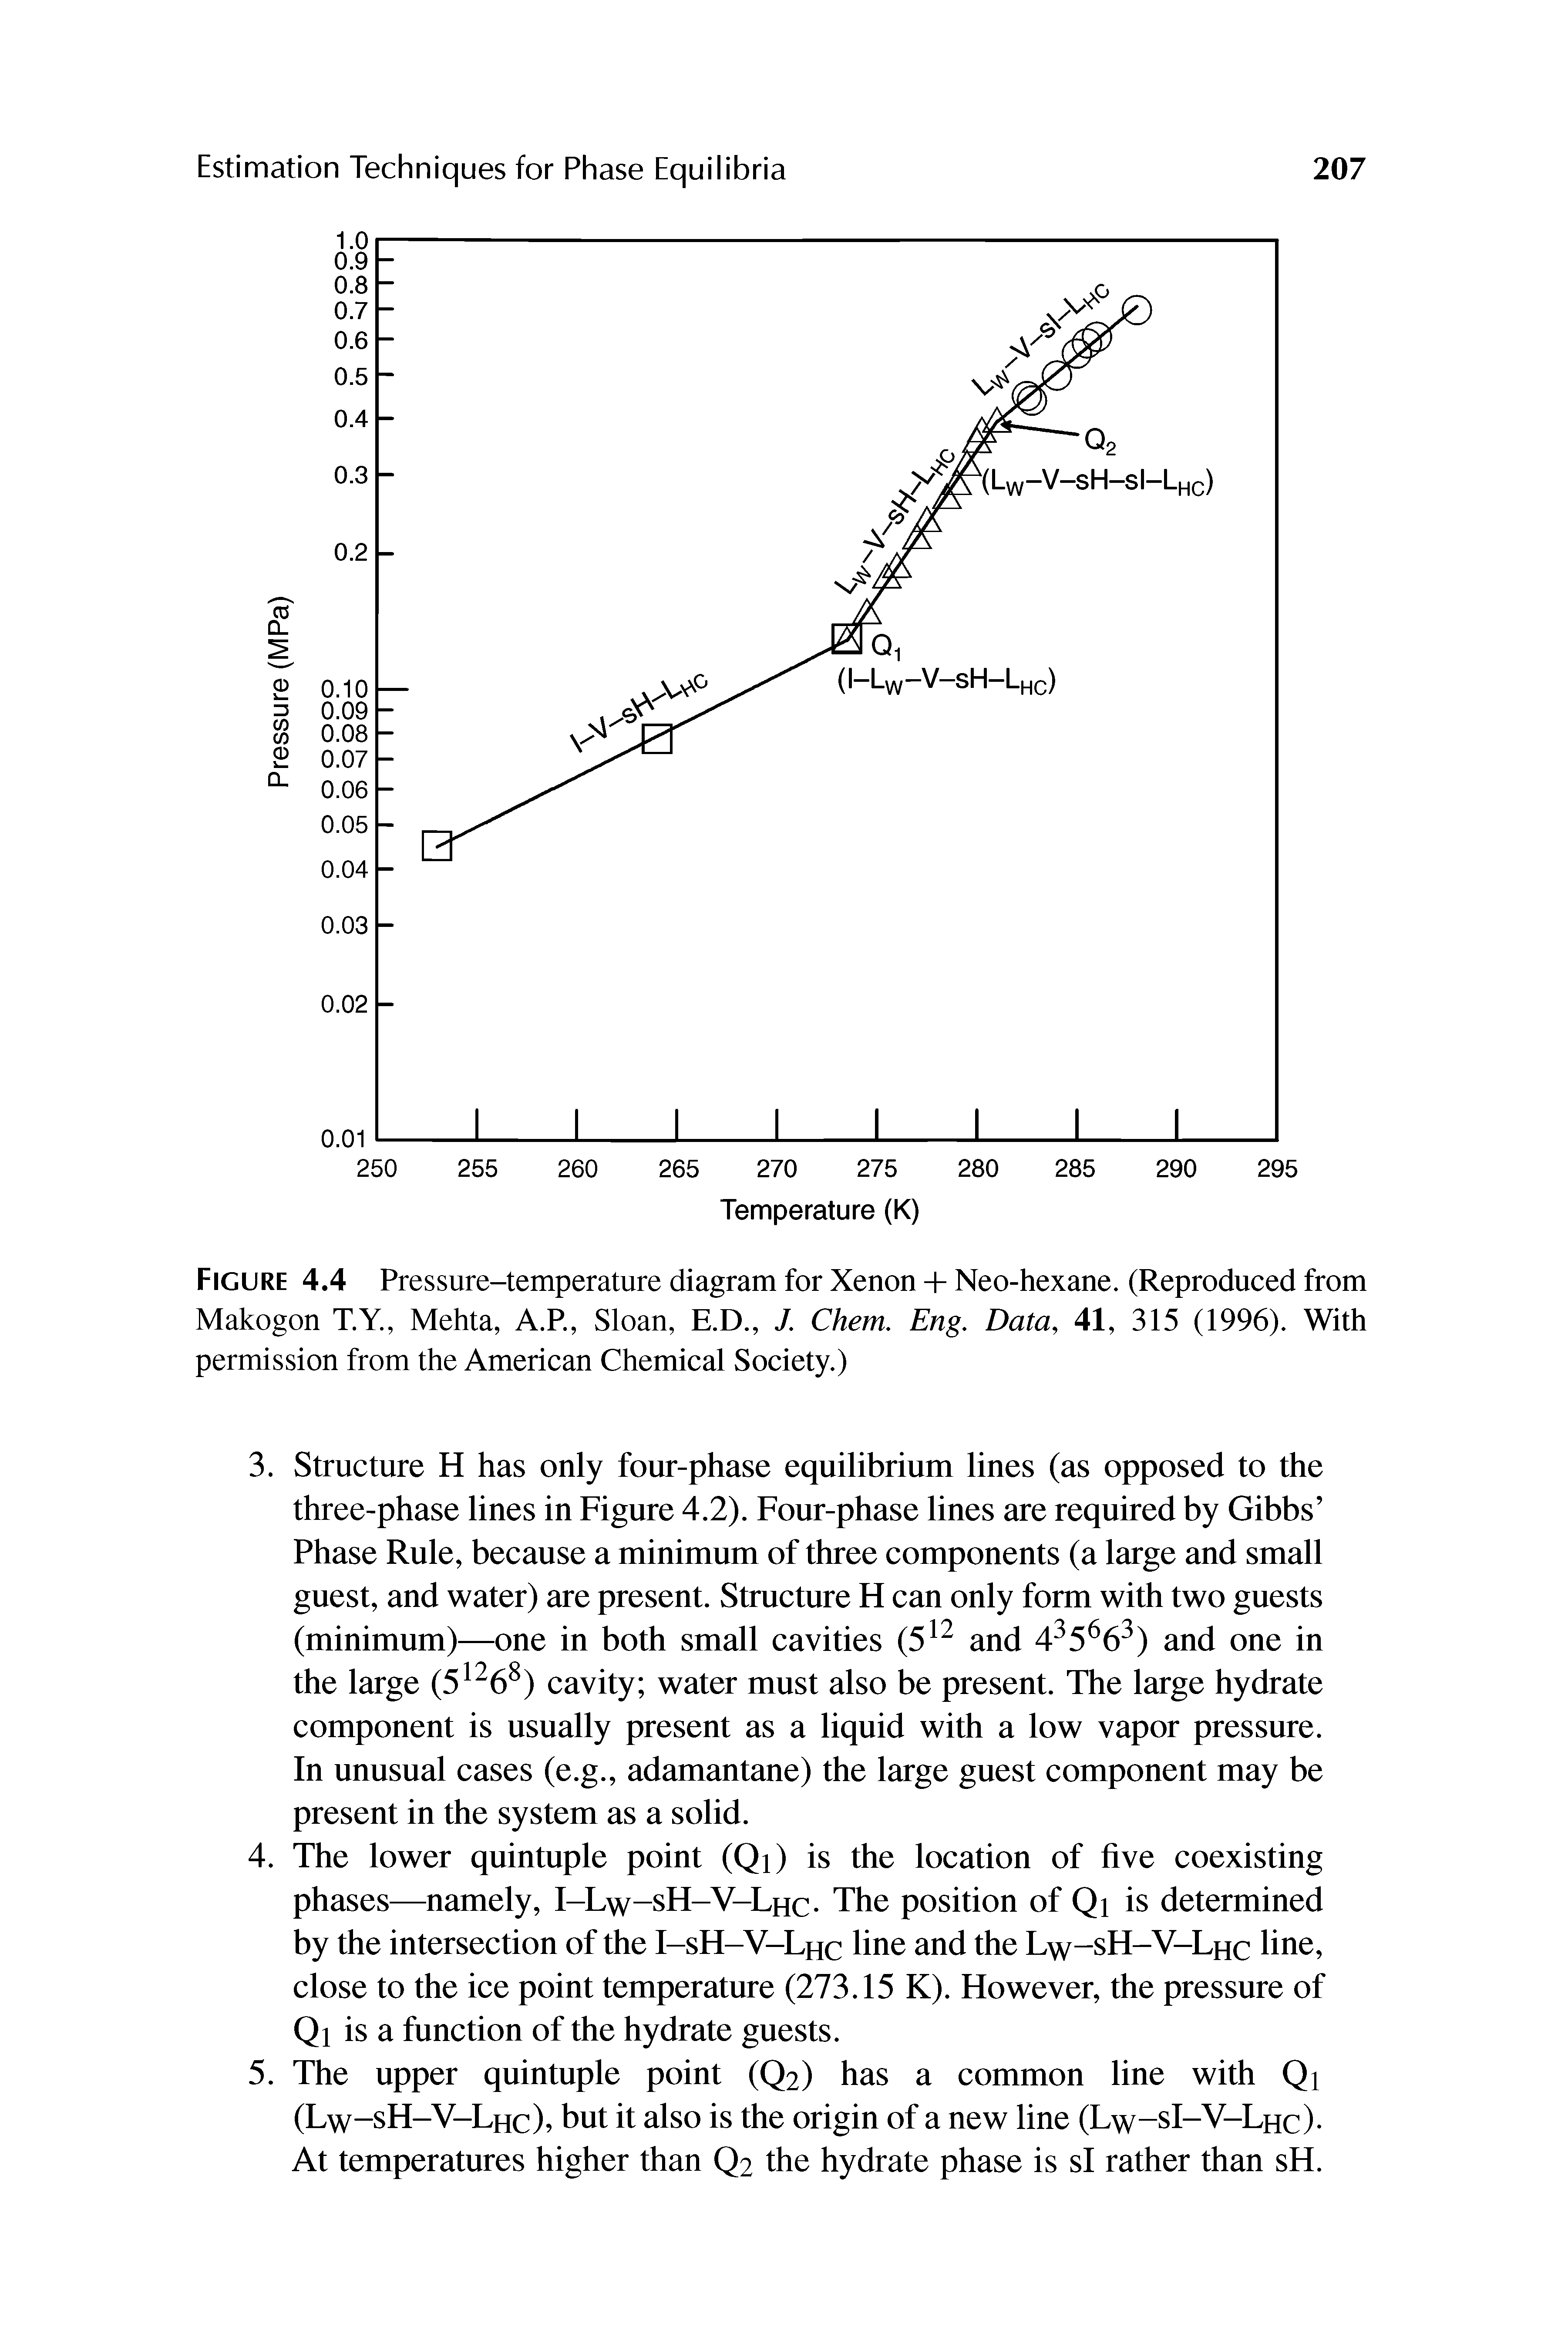 Figure 4.4 Pressure-temperature diagram for Xenon + Neo-hexane. (Reproduced from Makogon T.Y., Mehta, A.P., Sloan, E.D., J. Chem. Eng. Data, 41, 315 (1996). With permission from the American Chemical Society.)...